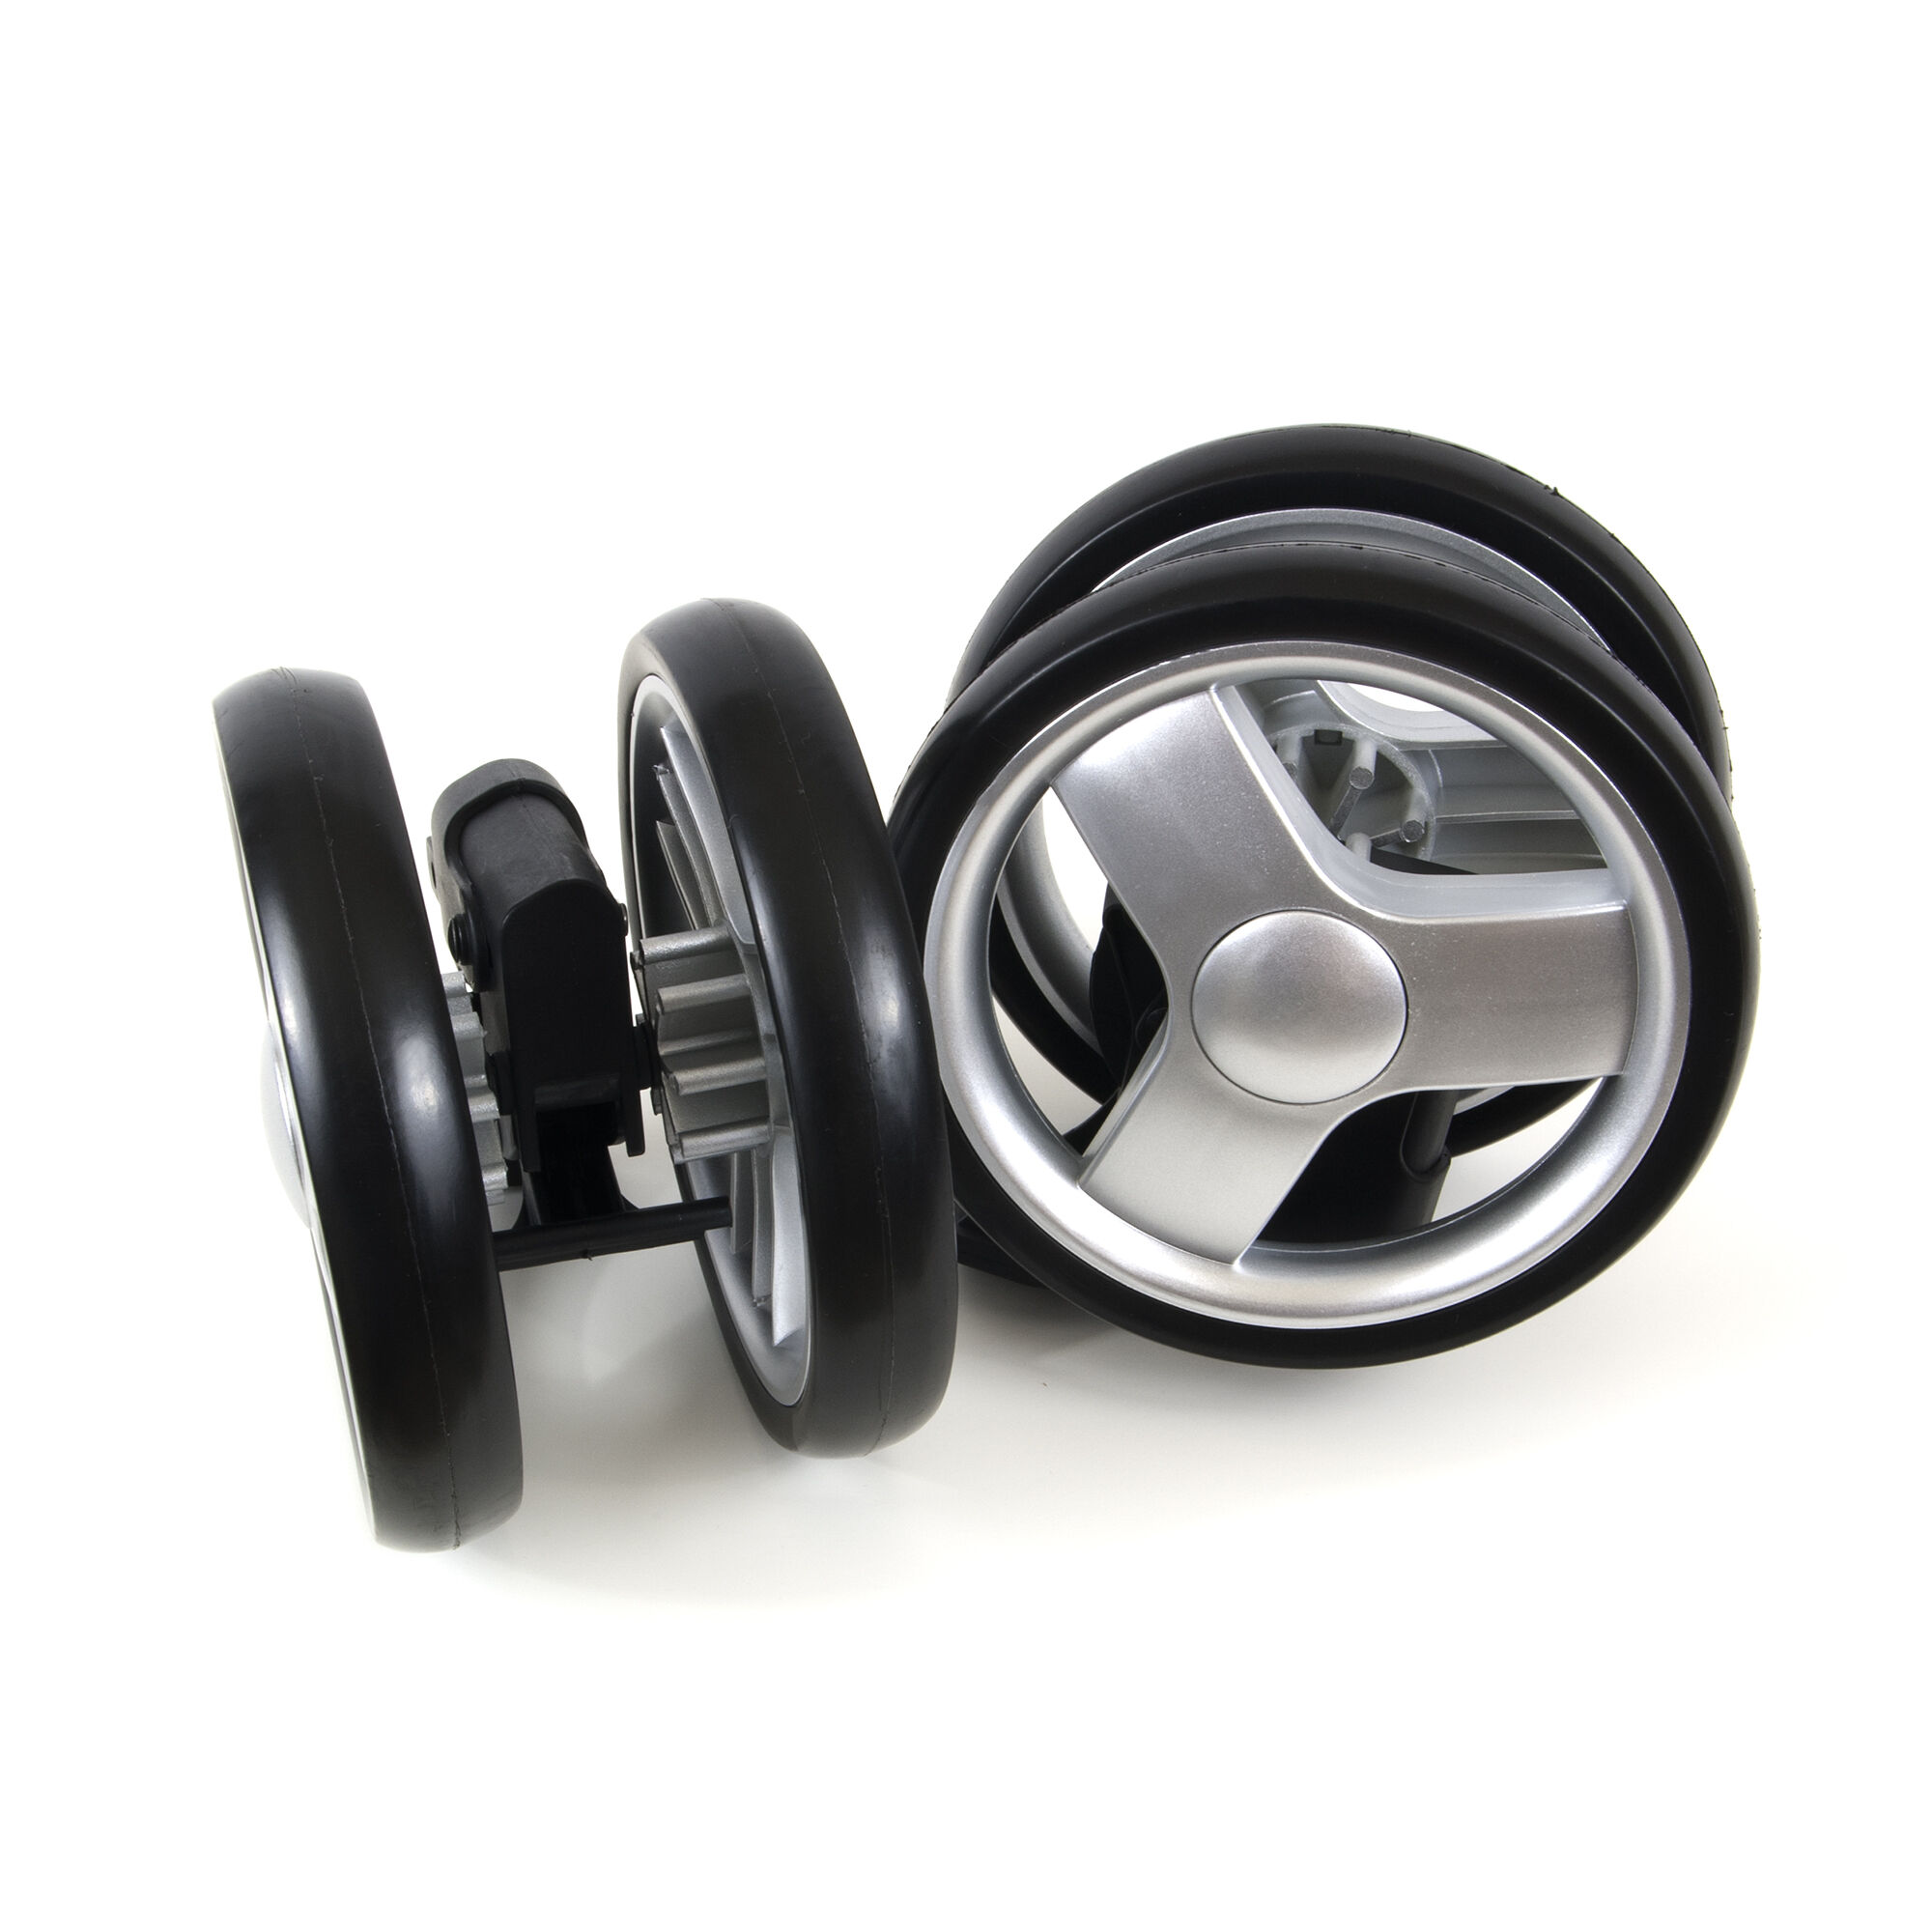 chicco stroller replacement wheels